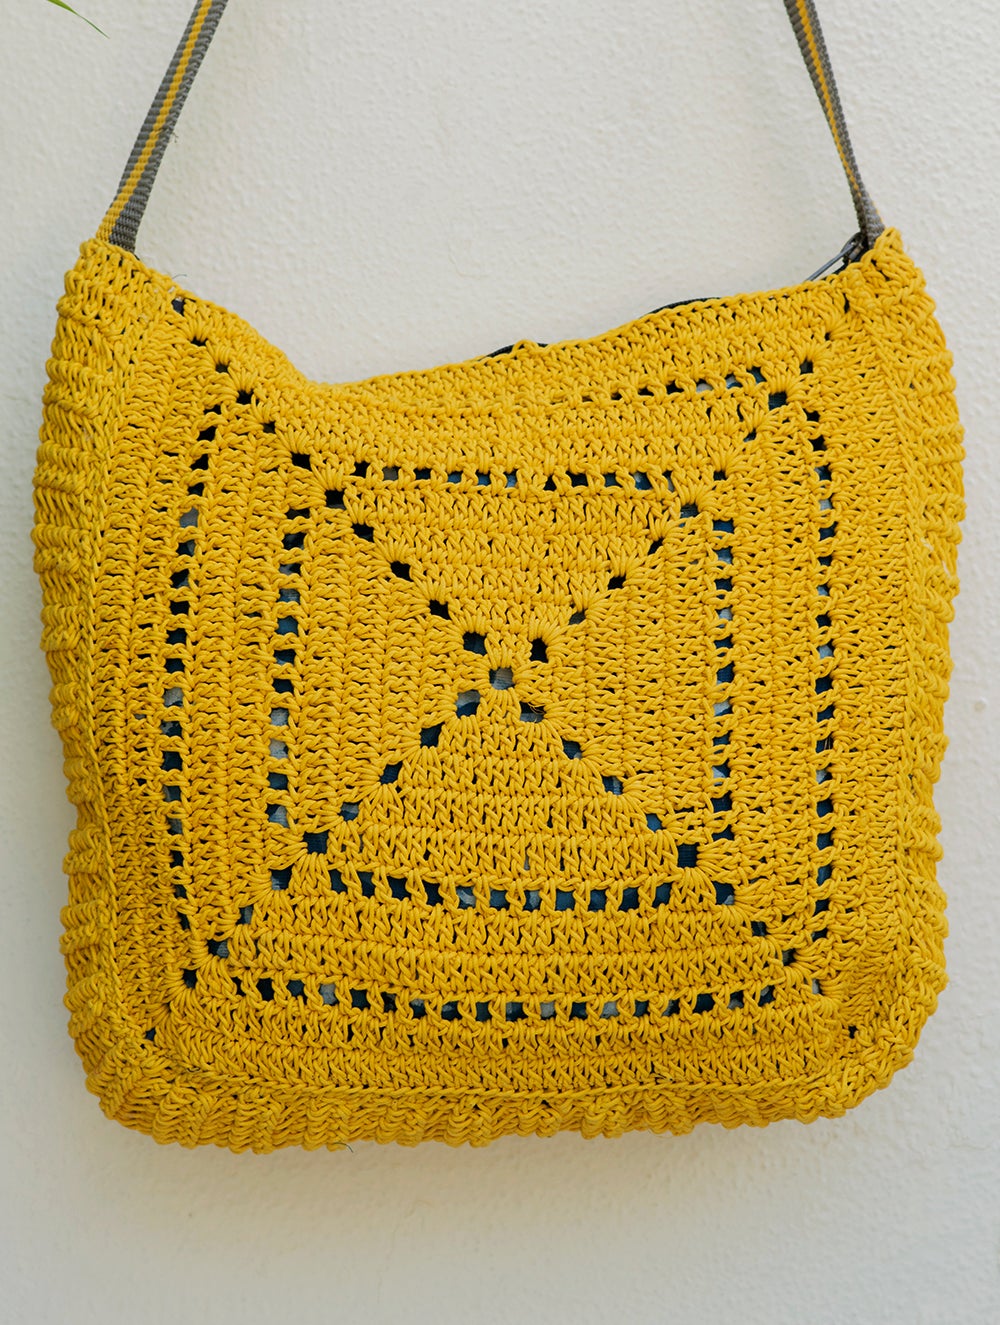 Load image into Gallery viewer, Handknotted Crochet Tote Bag - Yellow